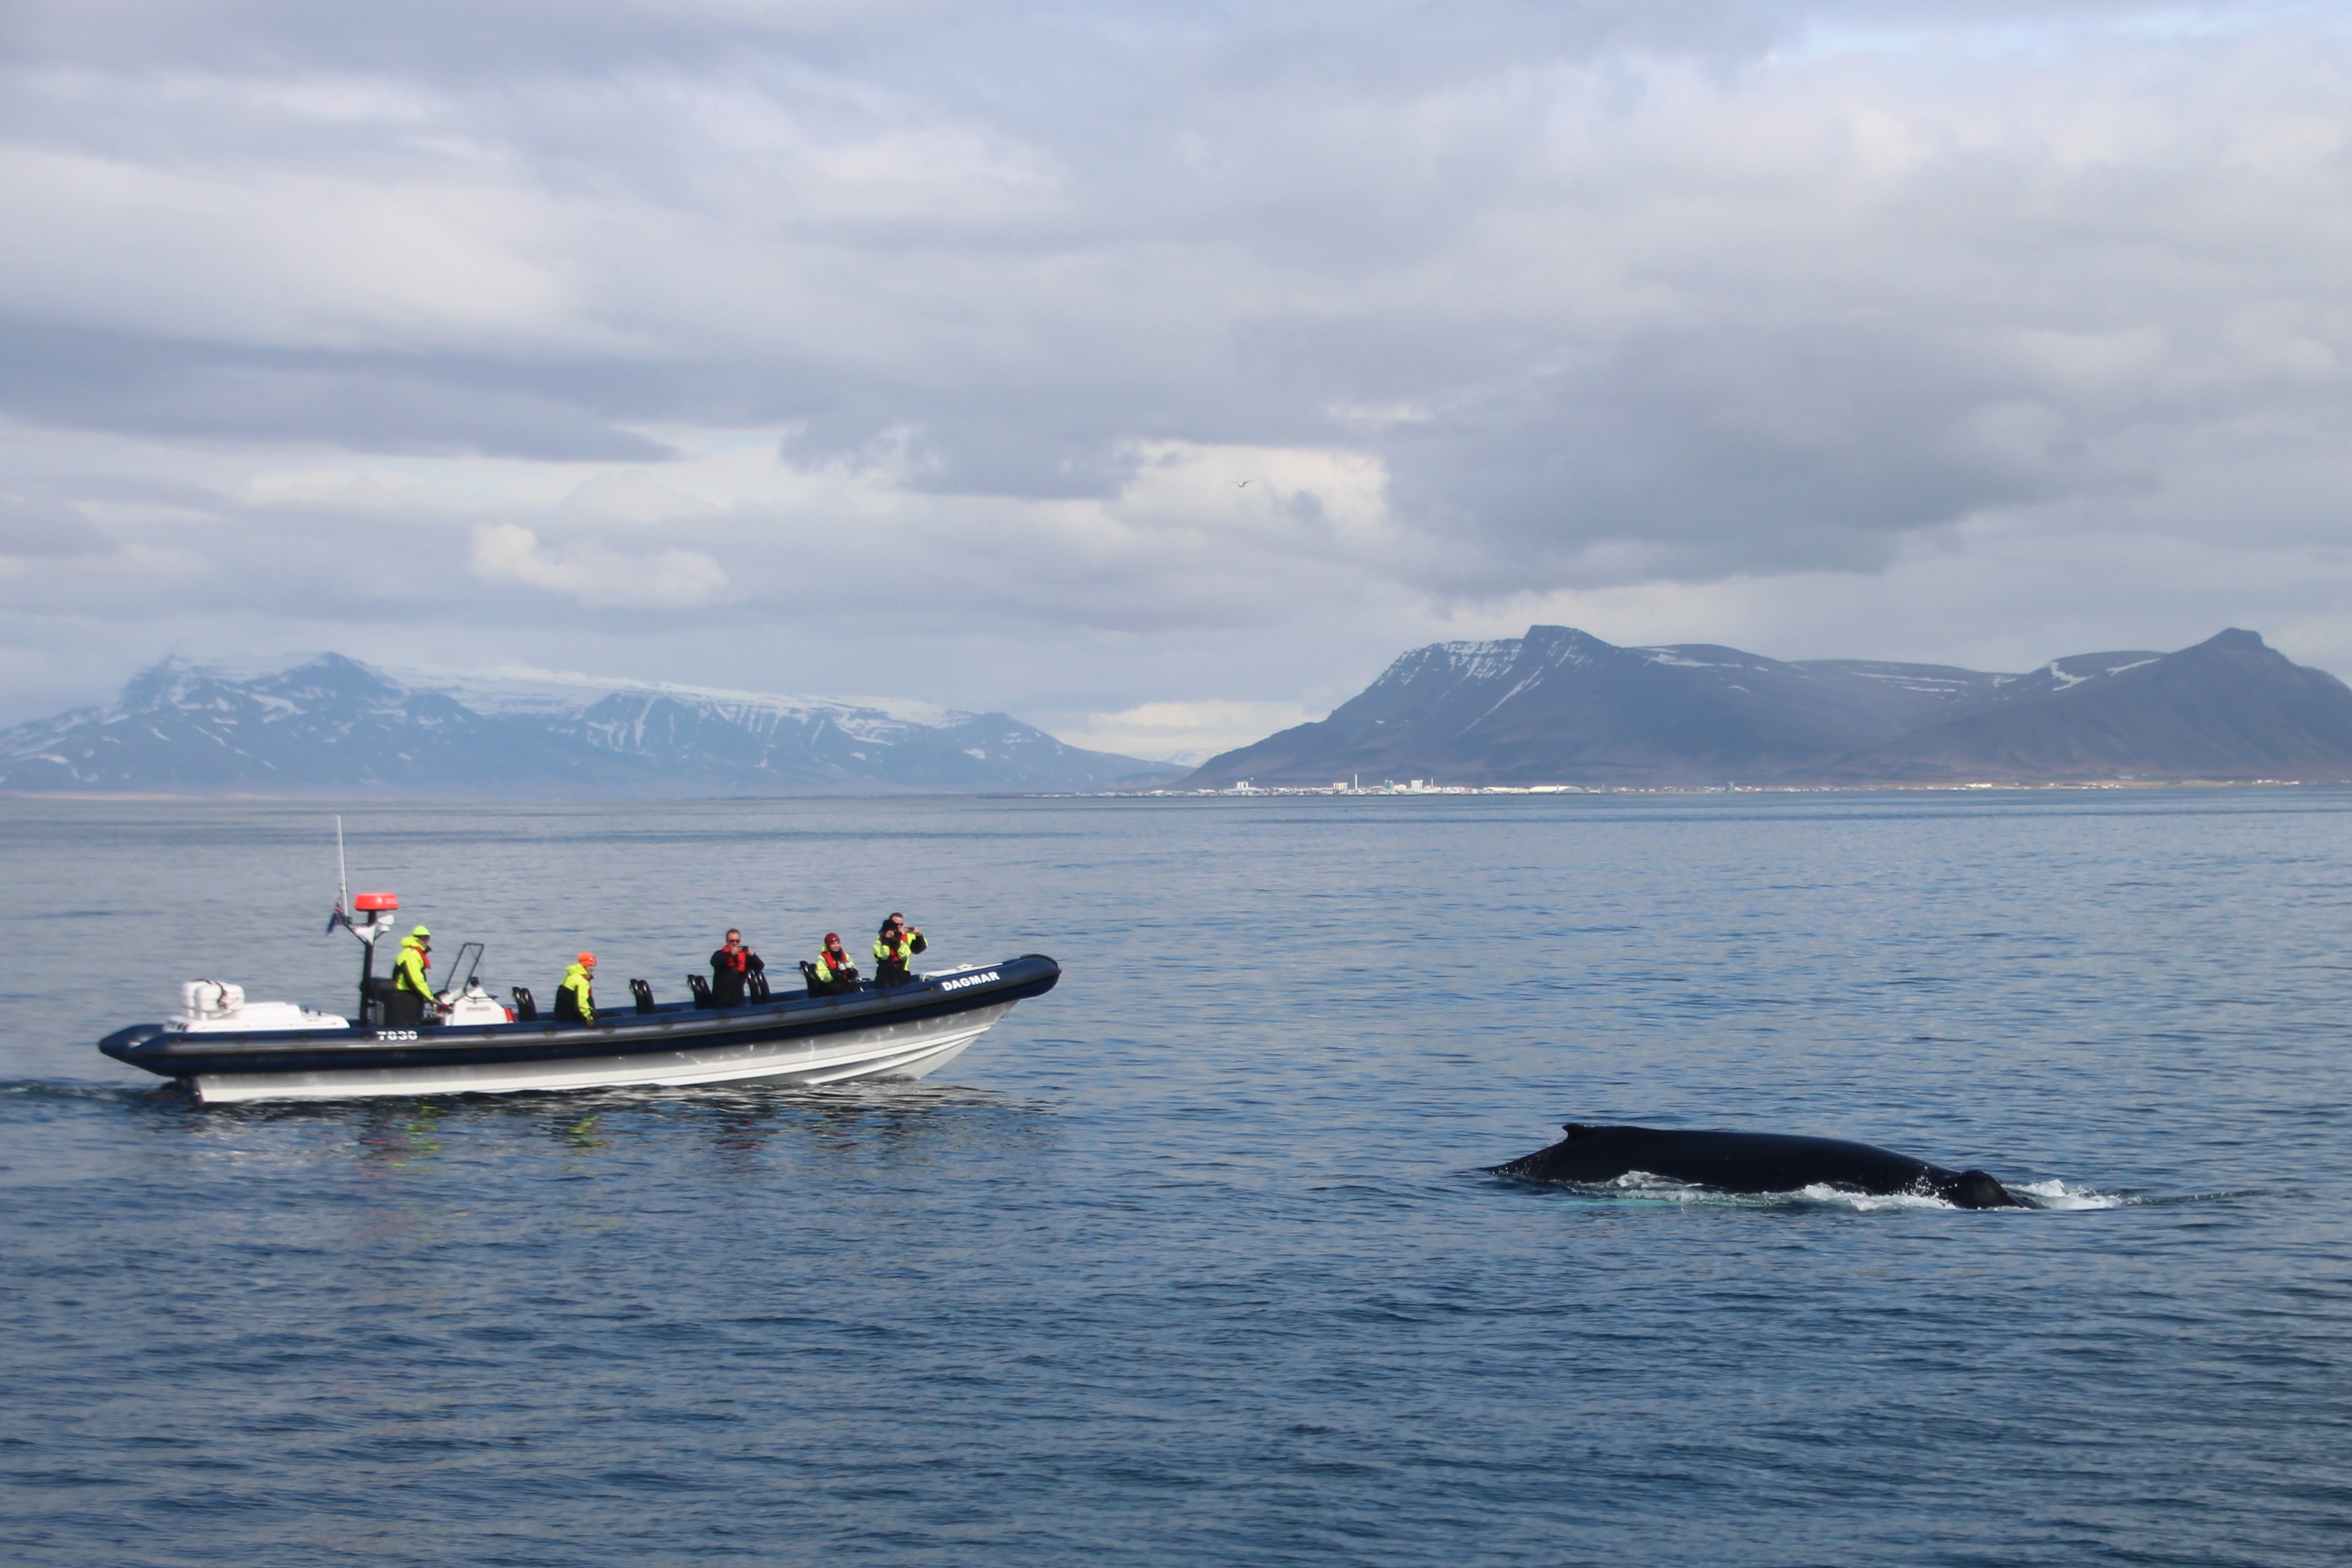 The RIB Boat Express gets you closer to the whales than any other type of vessel.